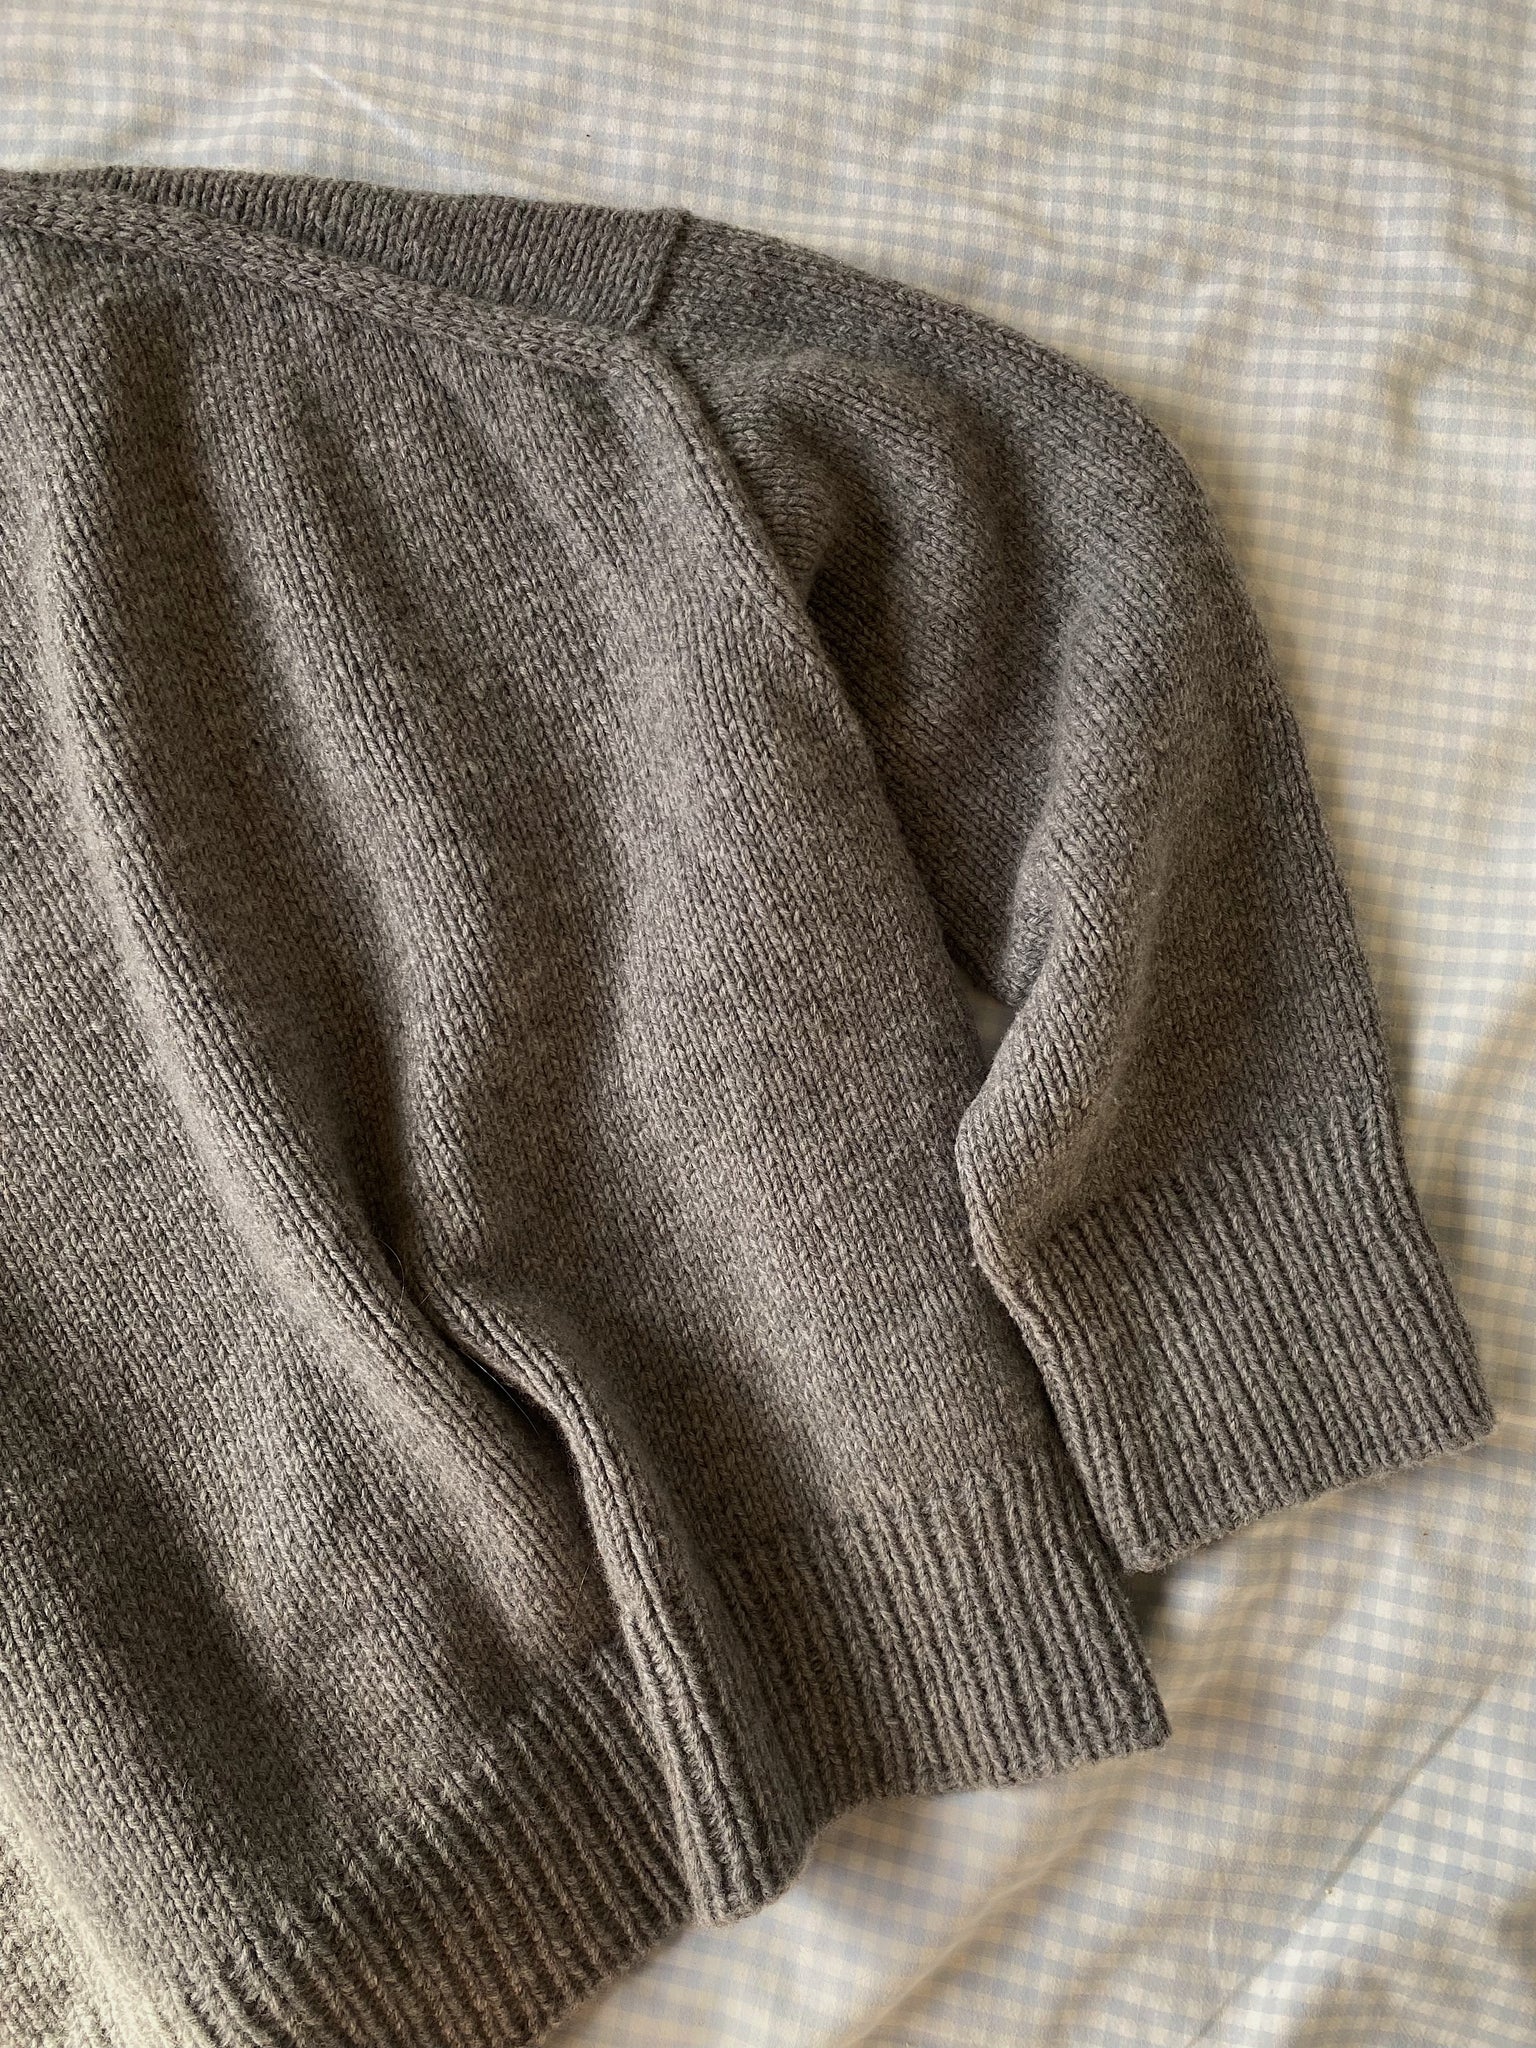 Sweater No. 23 - Knitting Pattern in English – • MY FAVOURITE THINGS ...